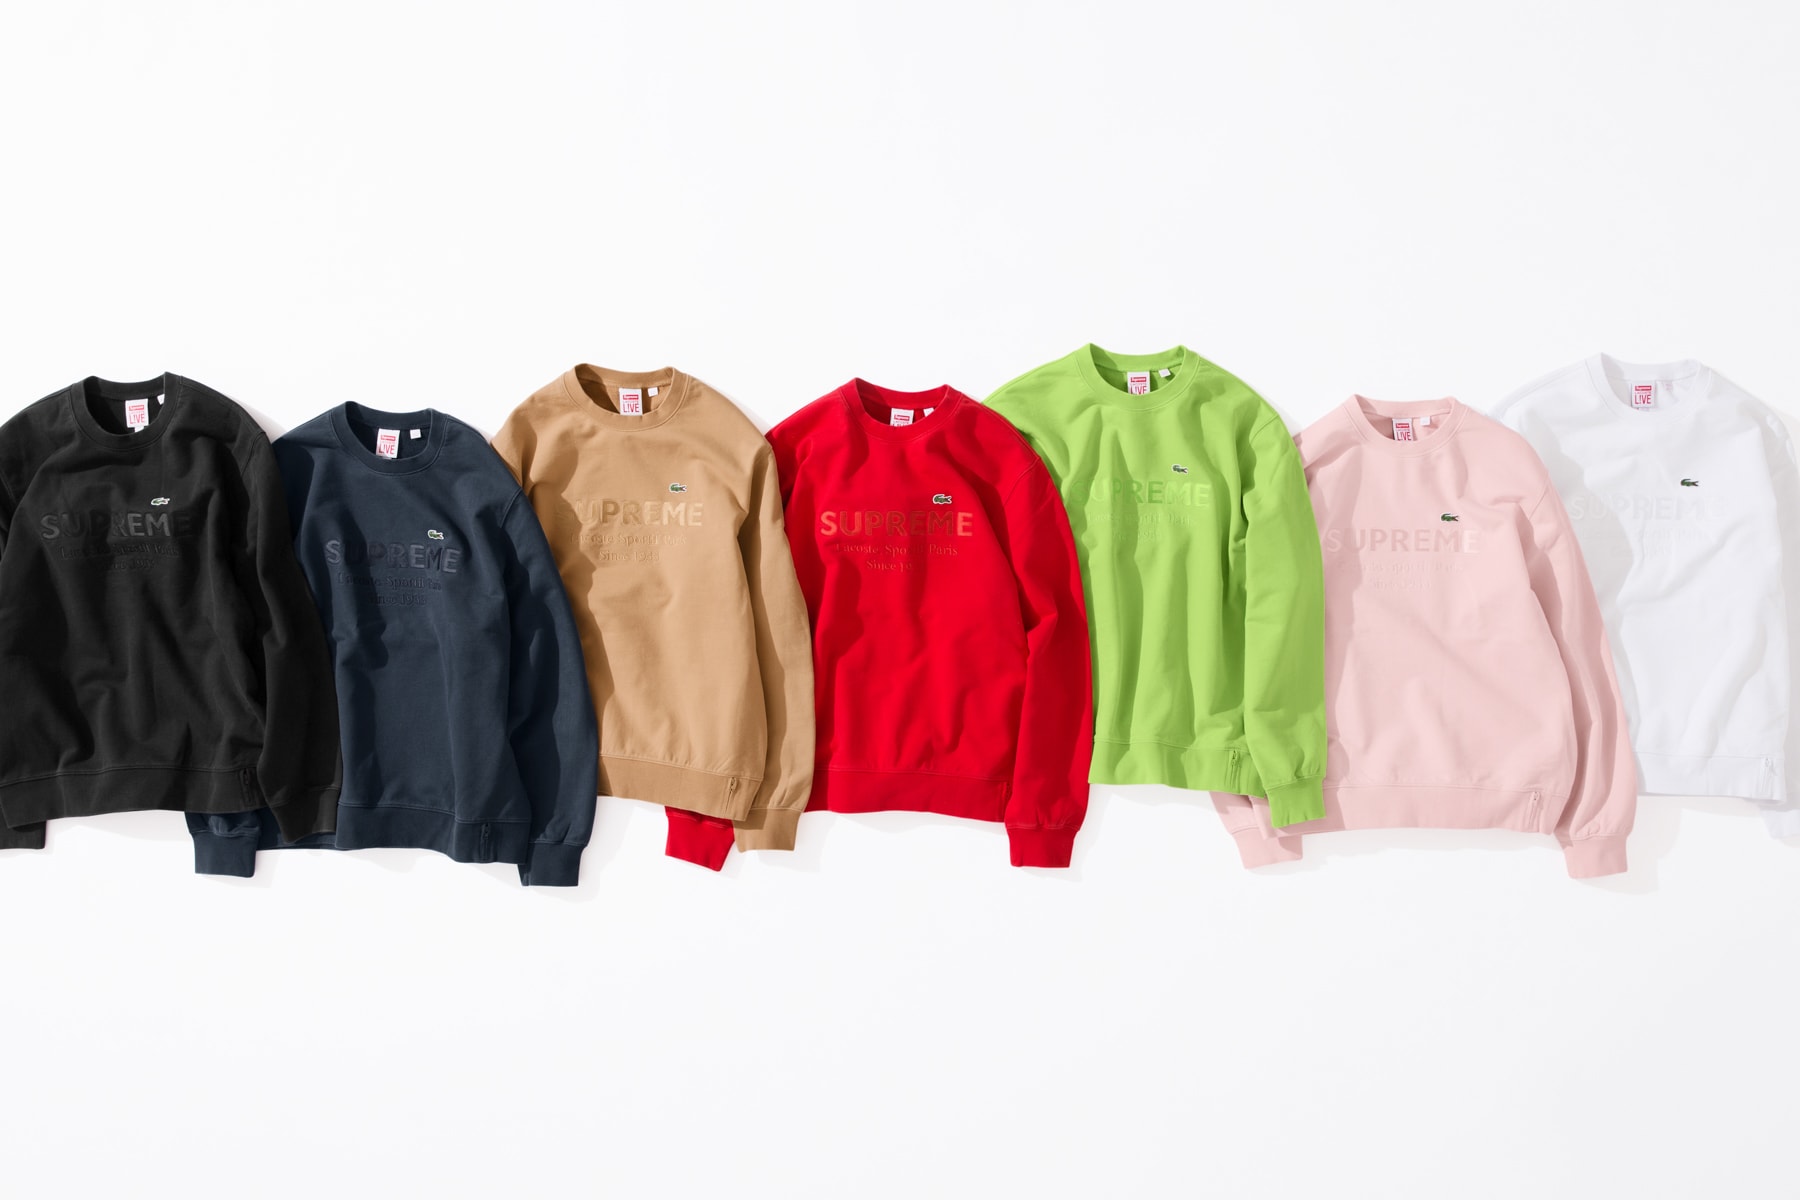 Supreme x Lacoste: Say bonjour to the third collaboration